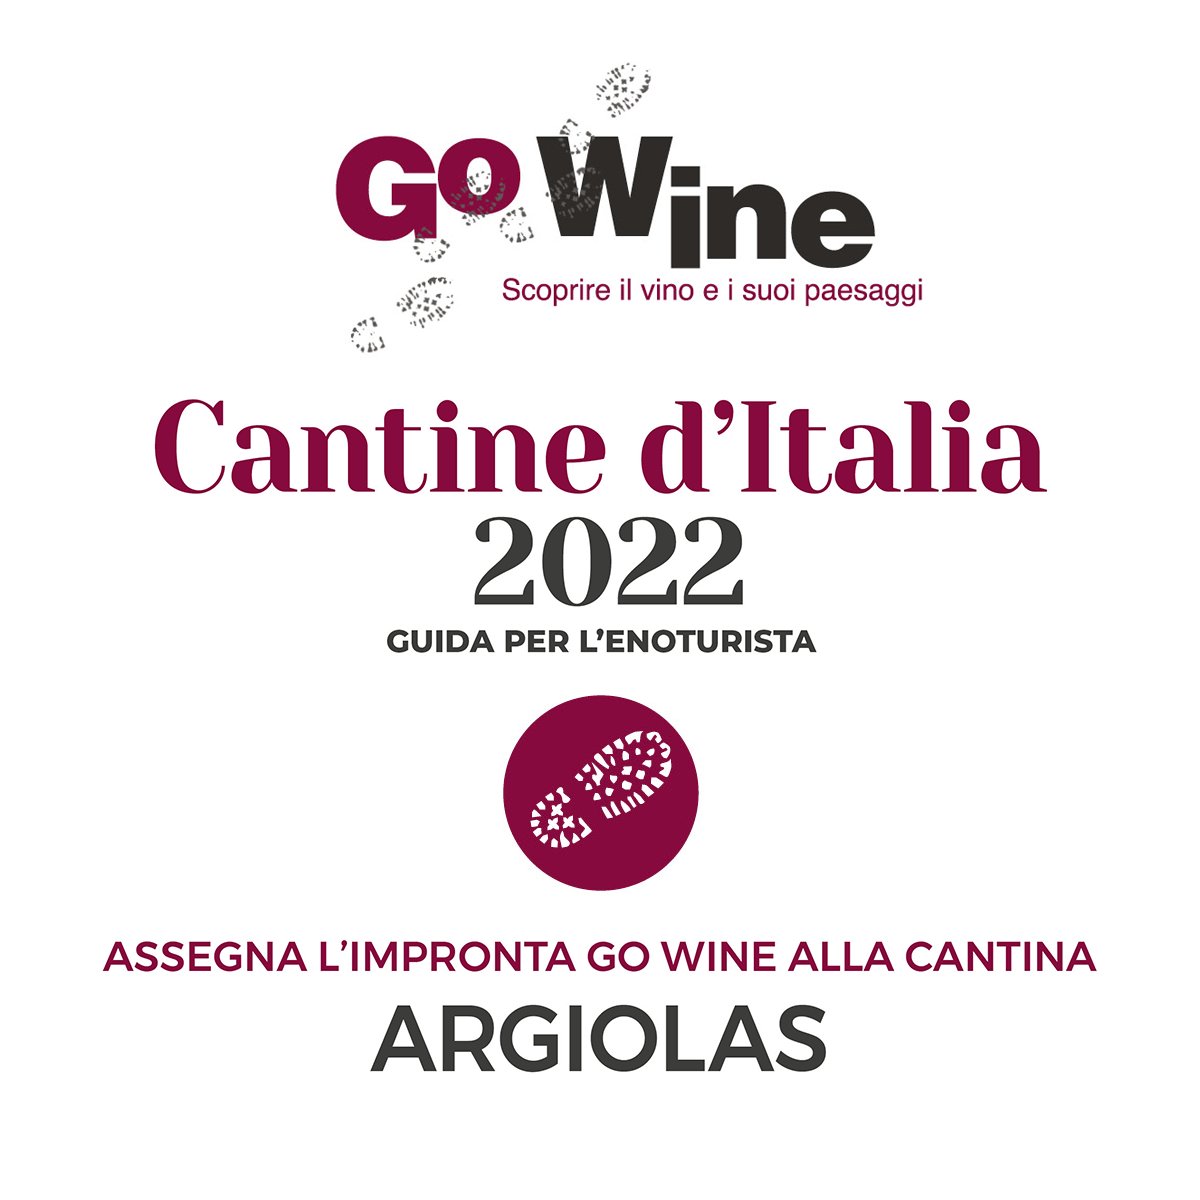 Is #wine worth a trip? ✈️ We absolutely think so and we are happy to have gained the @GoWine5 recognition for wine #hospitality in the 2022 Guide. We are waiting for you in #Sardinia all year round for visiting and tasting experiences: lnkd.in/e3paxf-z